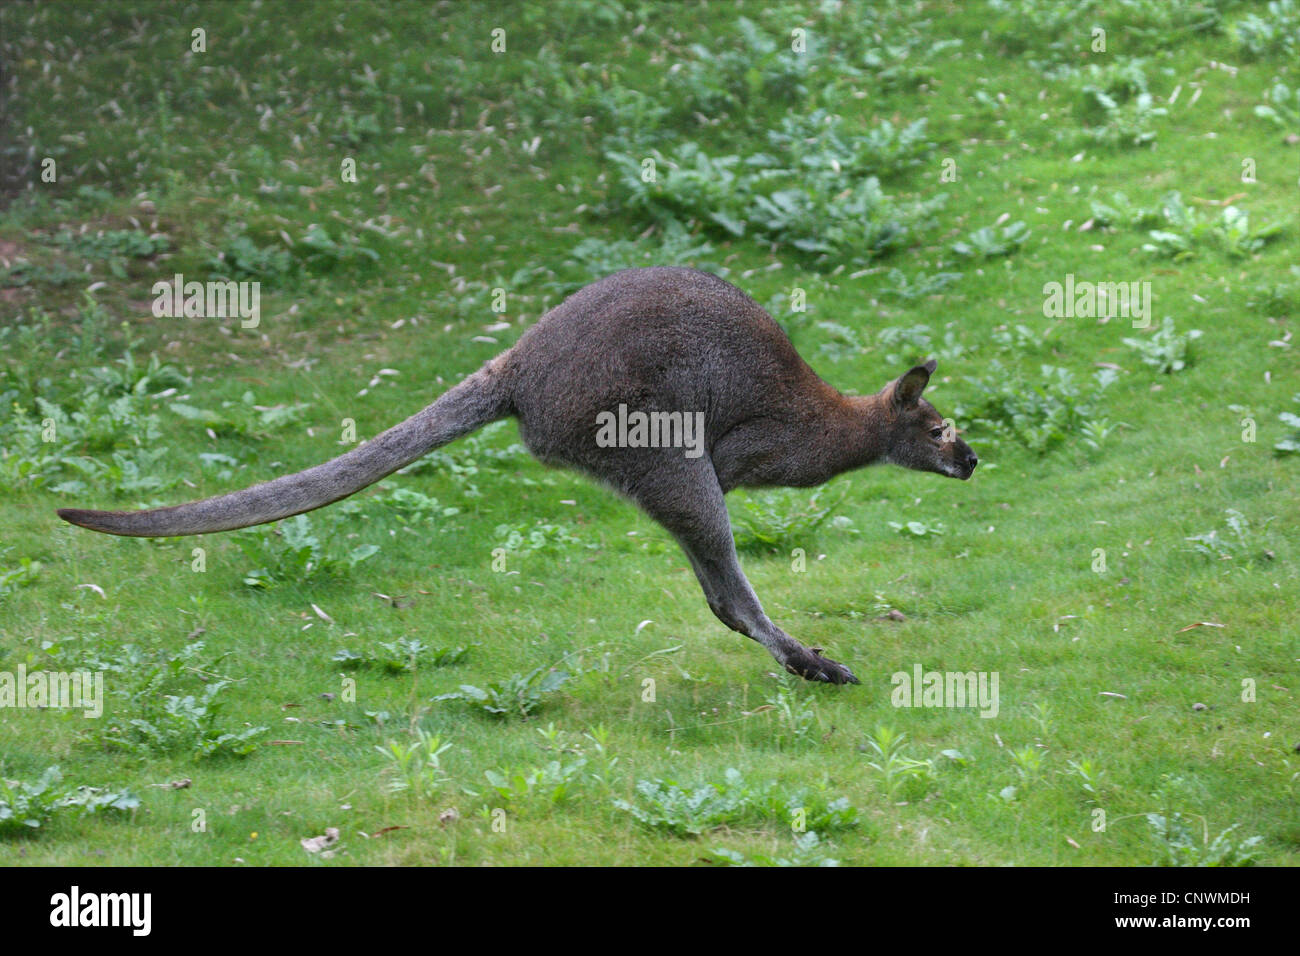 red-necked wallaby, Bennett's Wallaby (Macropus rufogriseus, Wallabia rufogrisea), jumping, Australia Stock Photo